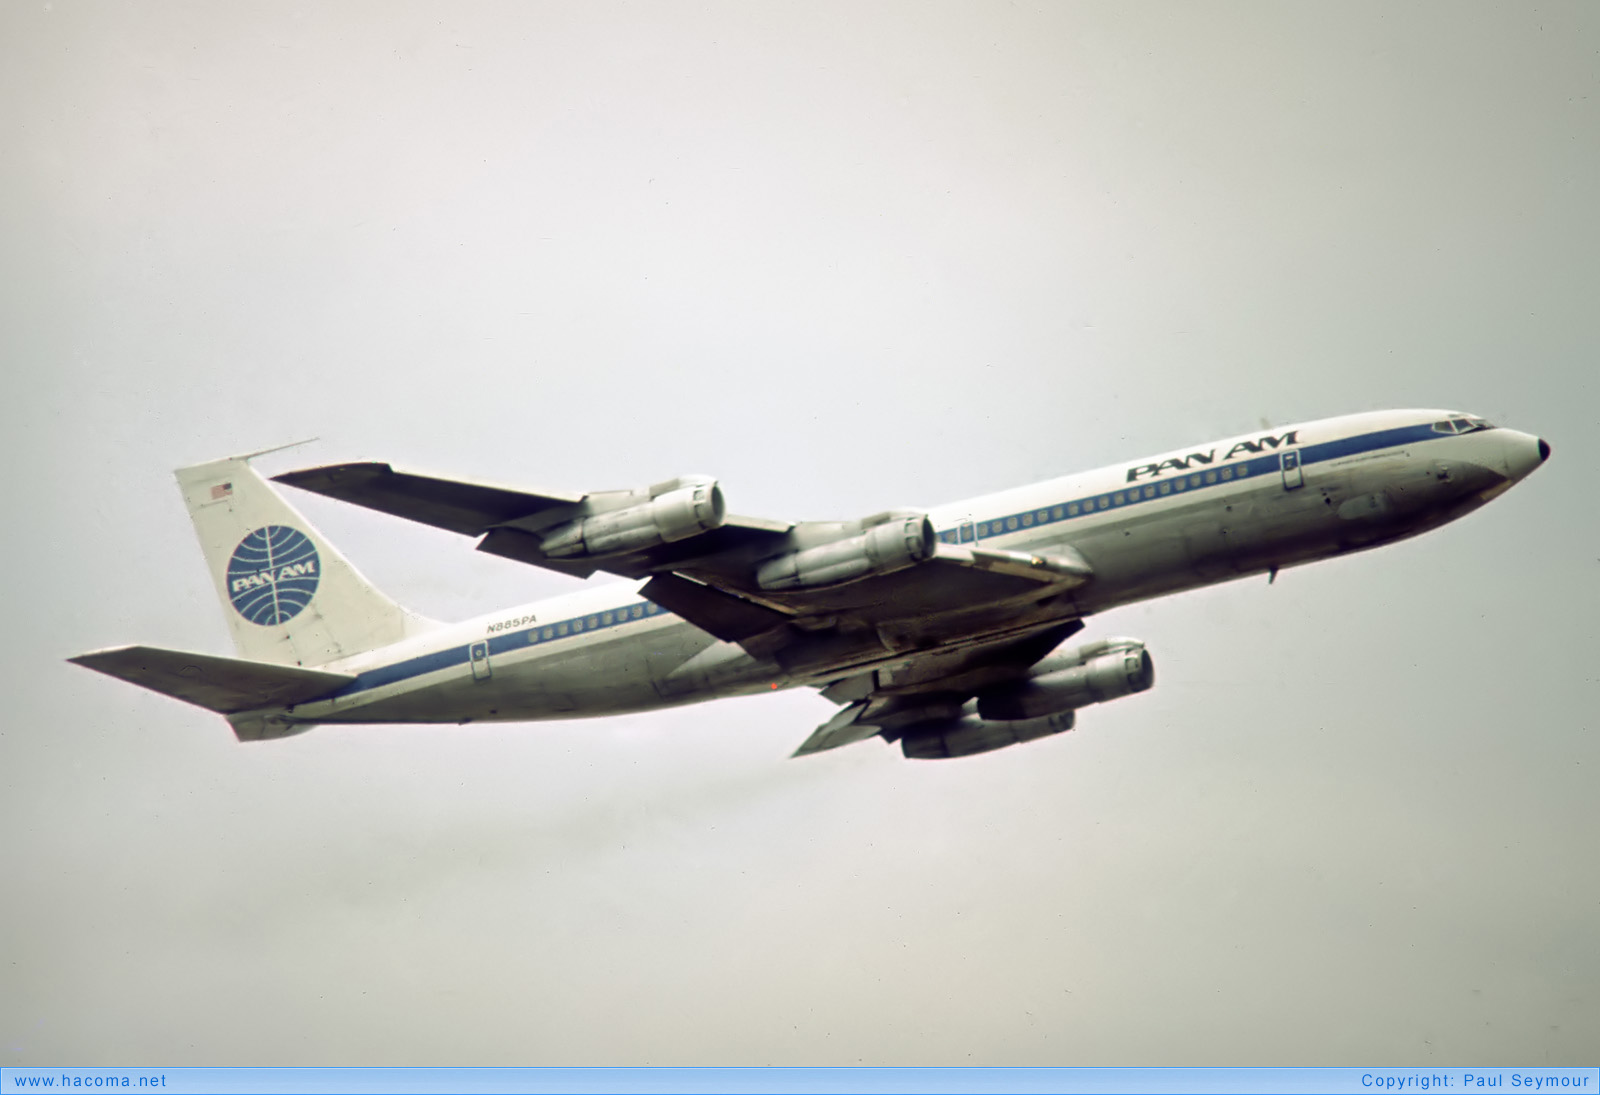 Photo of N885PA - Pan Am Clipper Northern Light - London Heathrow Airport - Oct 19, 1977